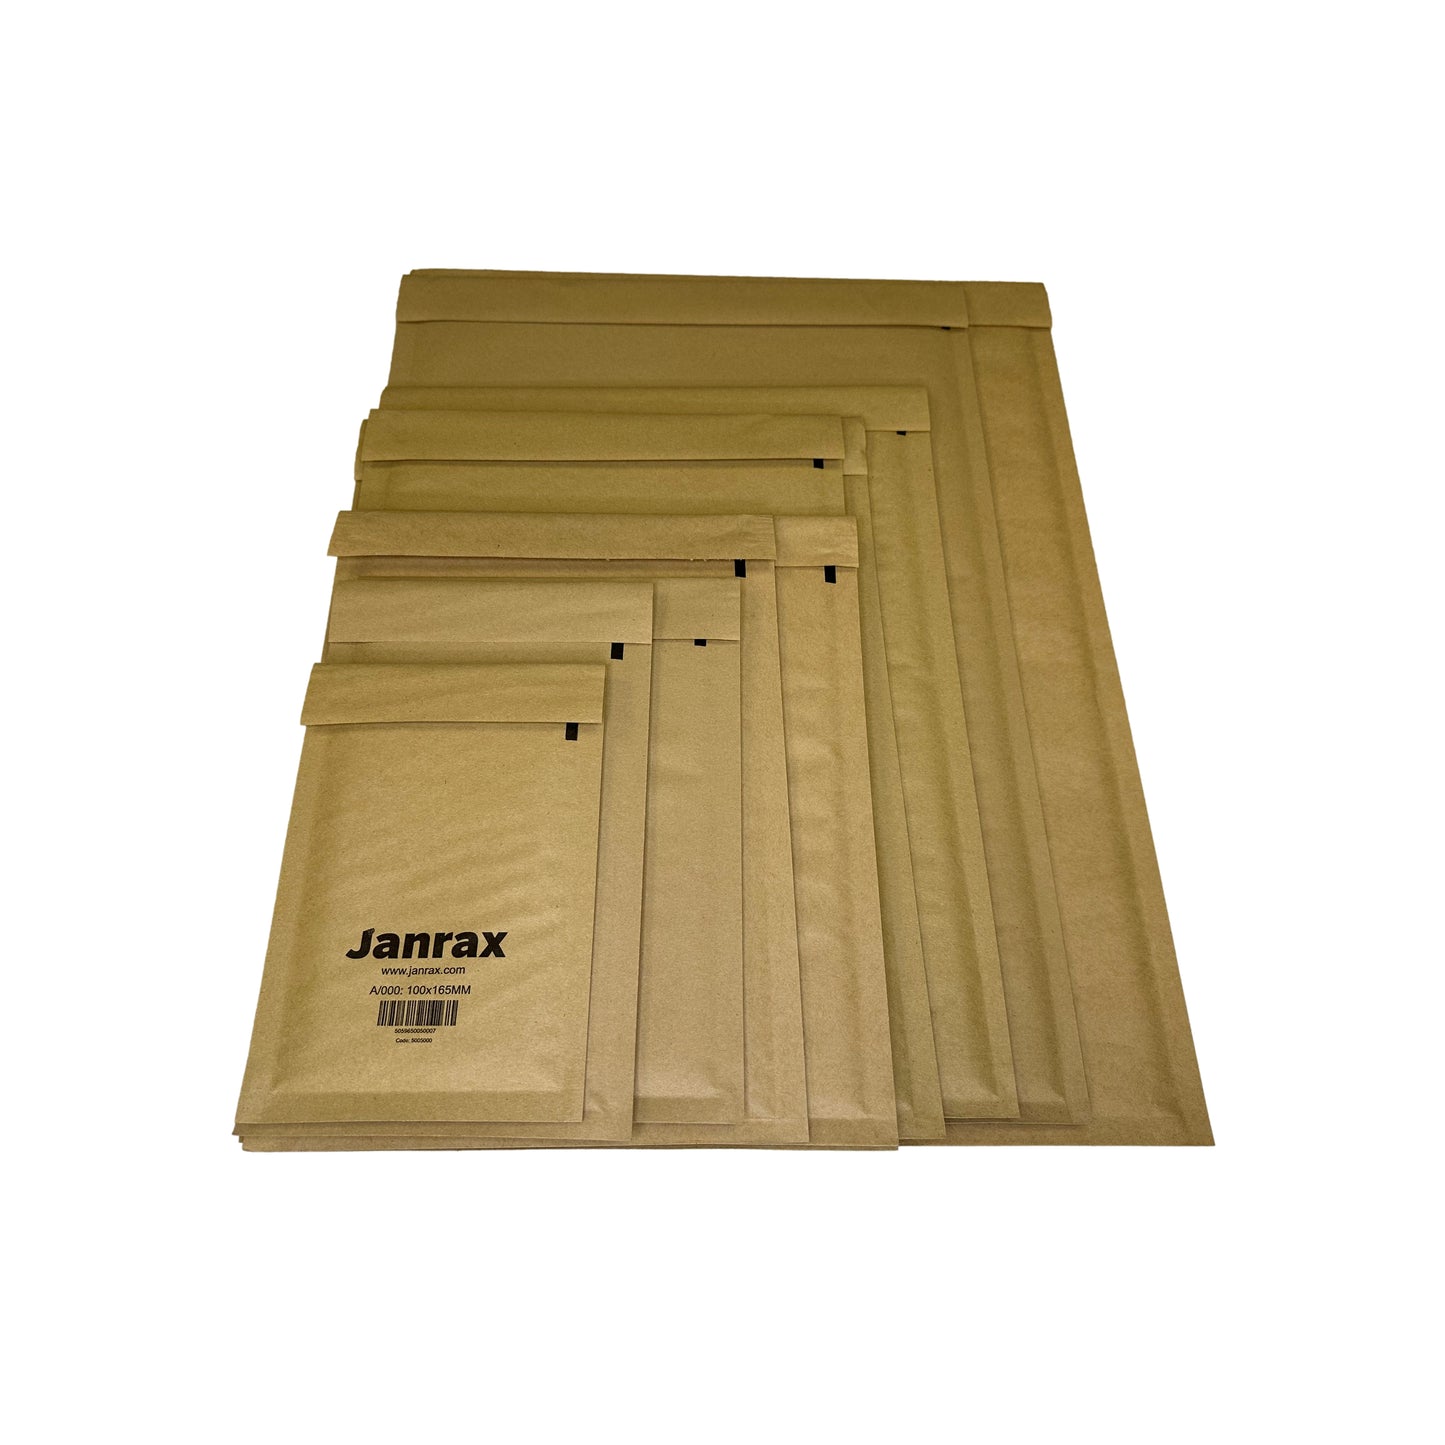 Pack of 100 Bubble Lined Size 4/G Padded Brown Postal Envelopes by Janrax